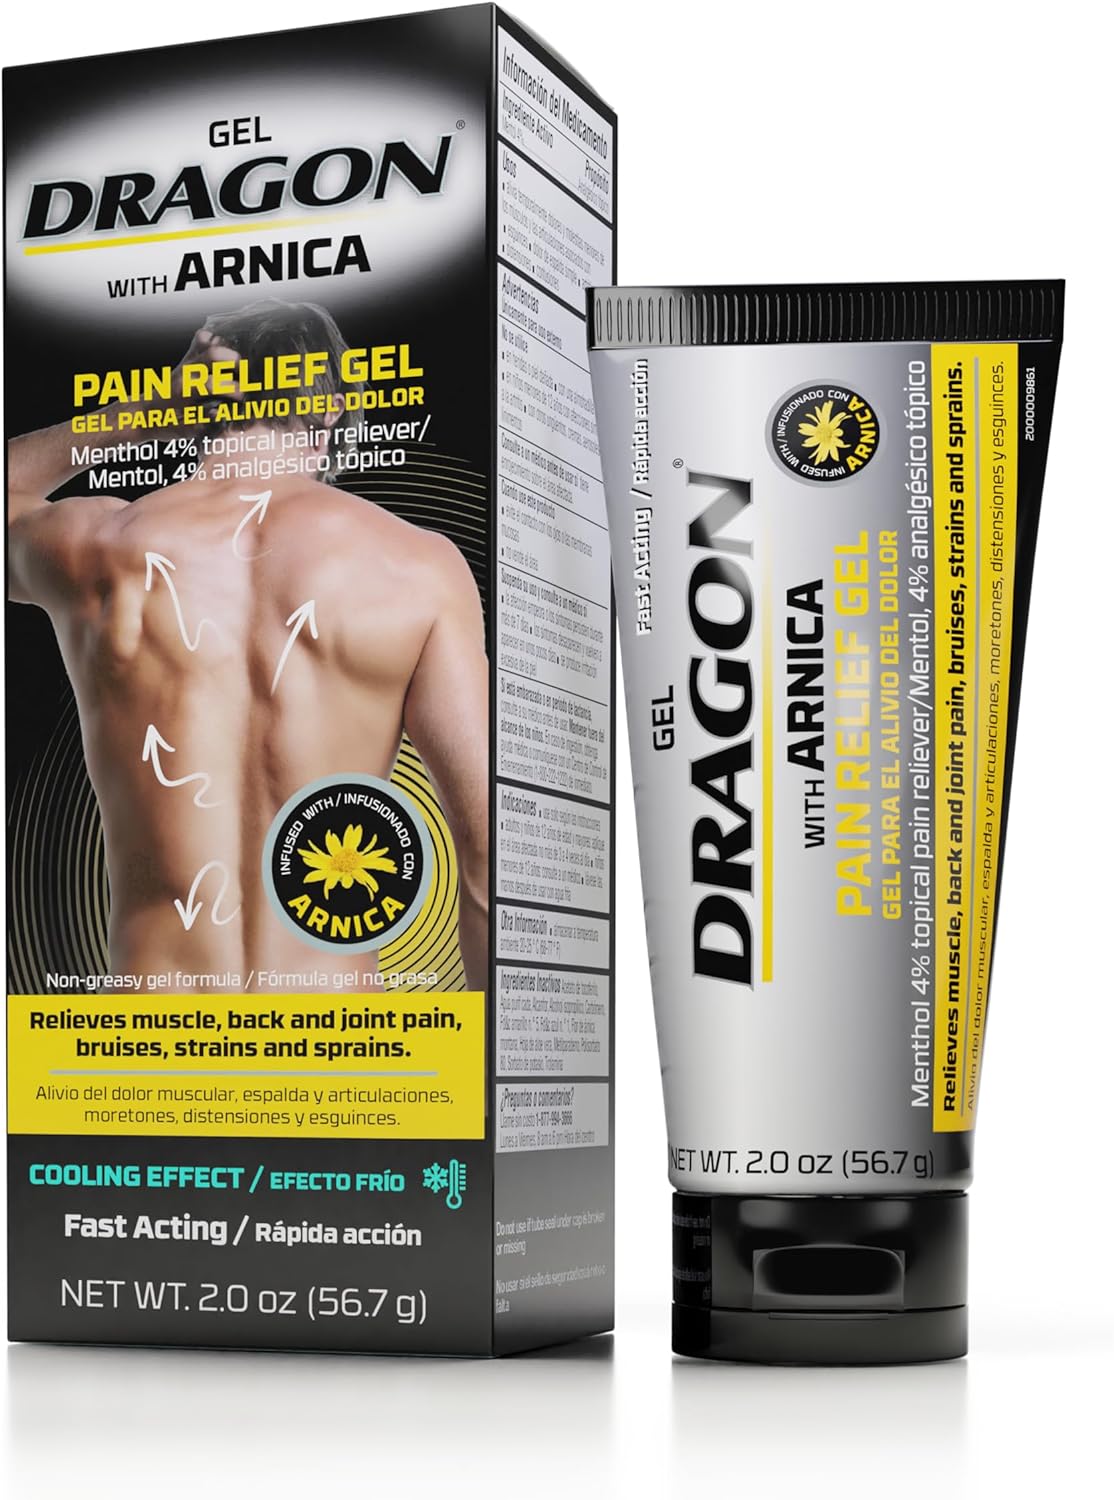 Dragon External Pain Relief Gel with Arnica for Muscle, Back & Joint Pain, Bruises, Strains and Sprains, 2 Oz